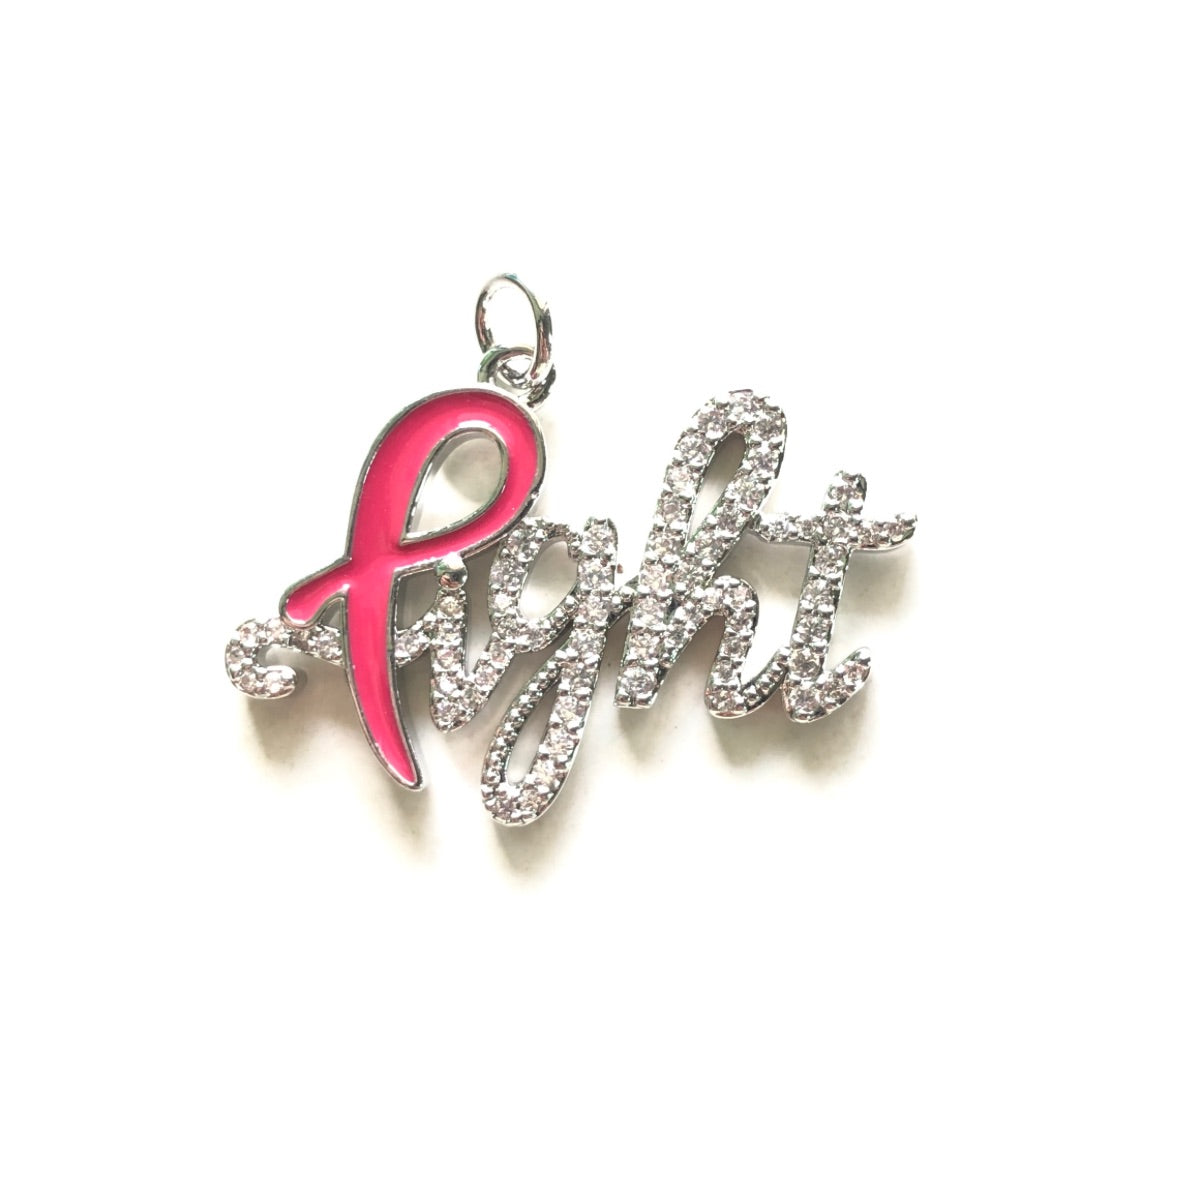 10pcs/lot CZ Paved Pink Ribbon Fight Charms - Breast Cancer Awareness Silver CZ Paved Charms Breast Cancer Awareness Charms Beads Beyond